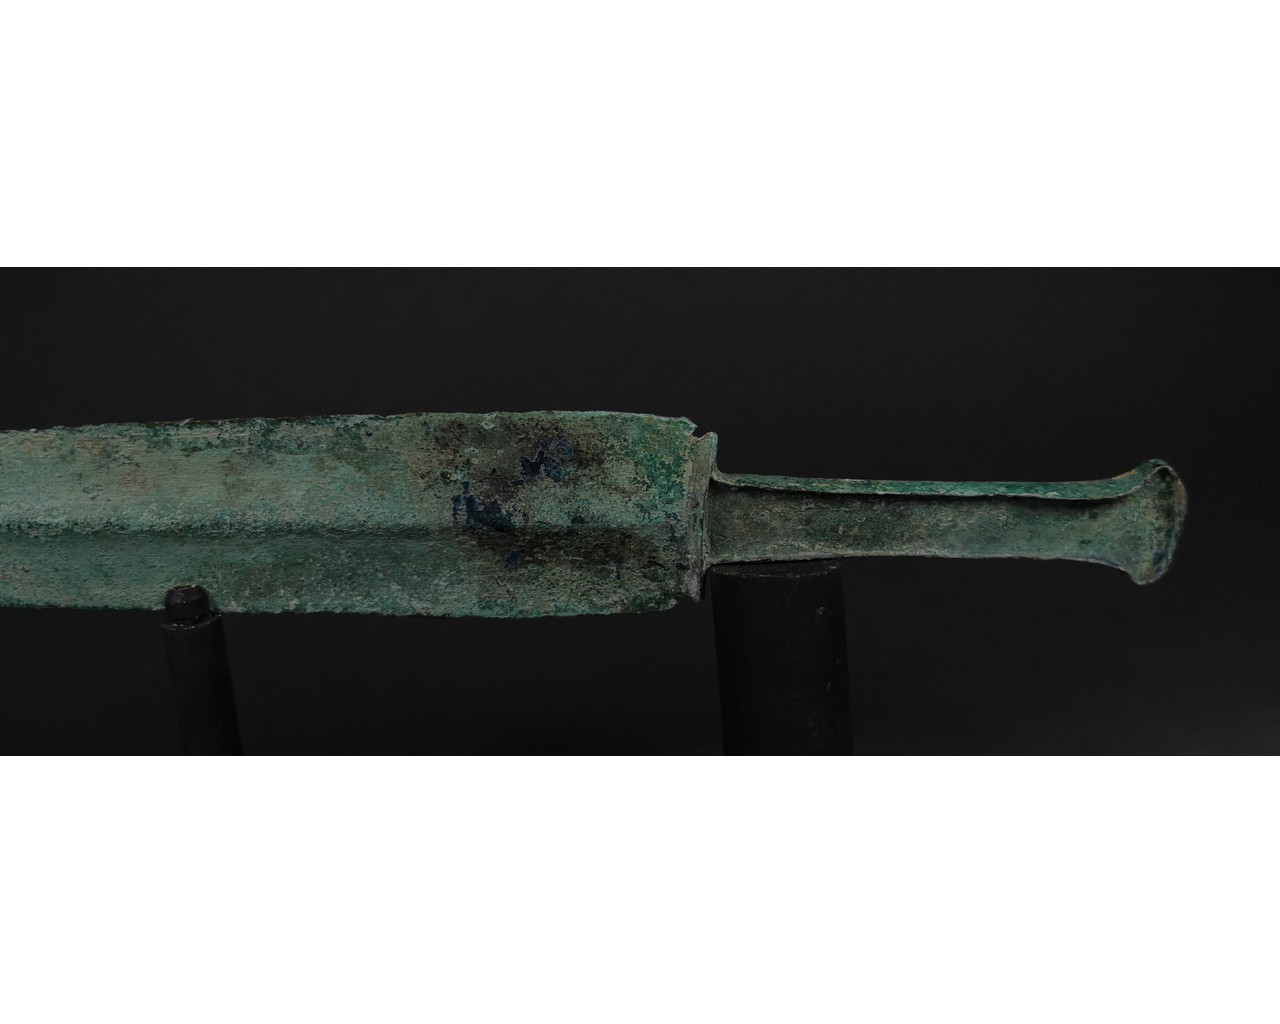 SUPERB ANCIENT BRONZE SWORD WITH HANDLE - Image 2 of 5